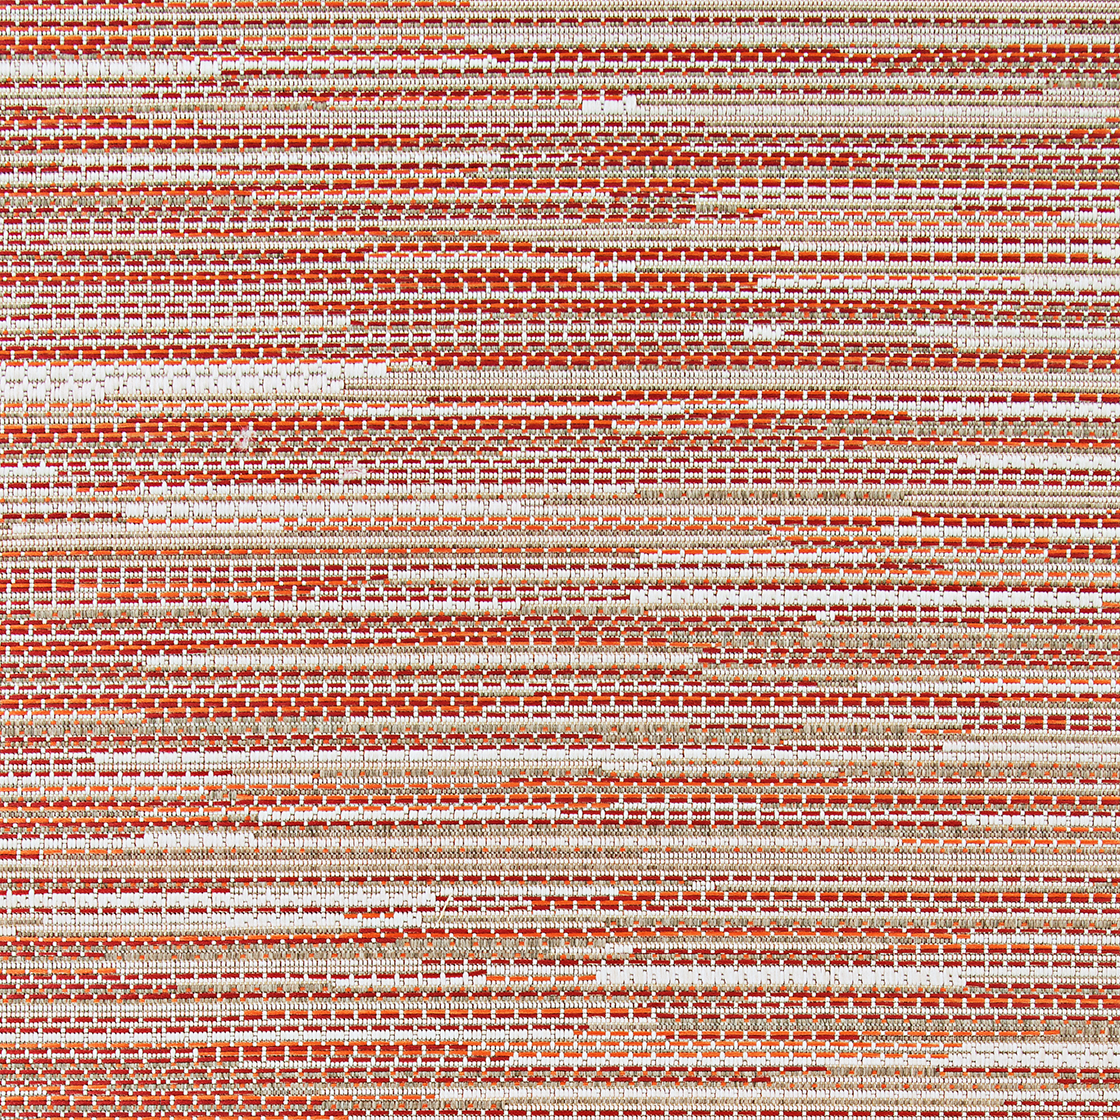 Couristan 2.25' x 11.75' Red and Beige Striped Rectangular Outdoor Area Throw Rug Runner